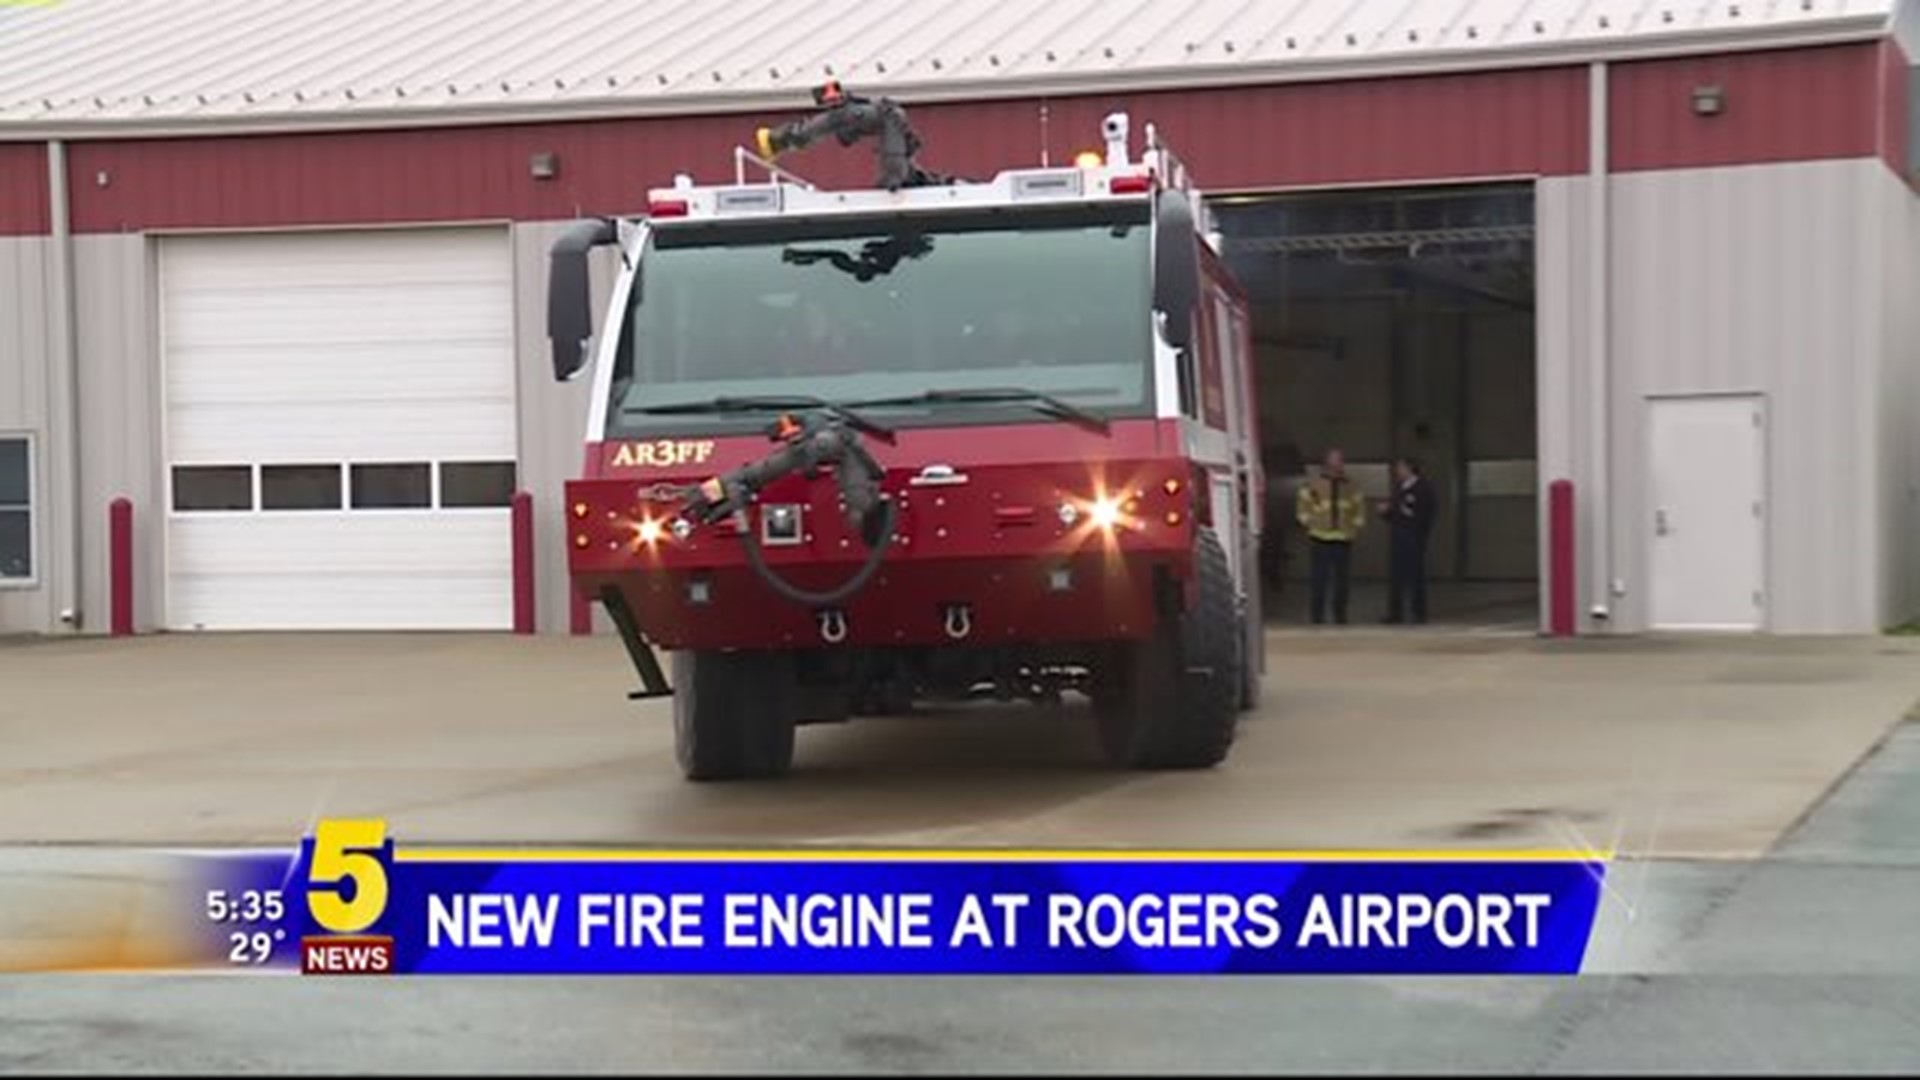 New Fire Engine To Improve Safety At Rogers Airport